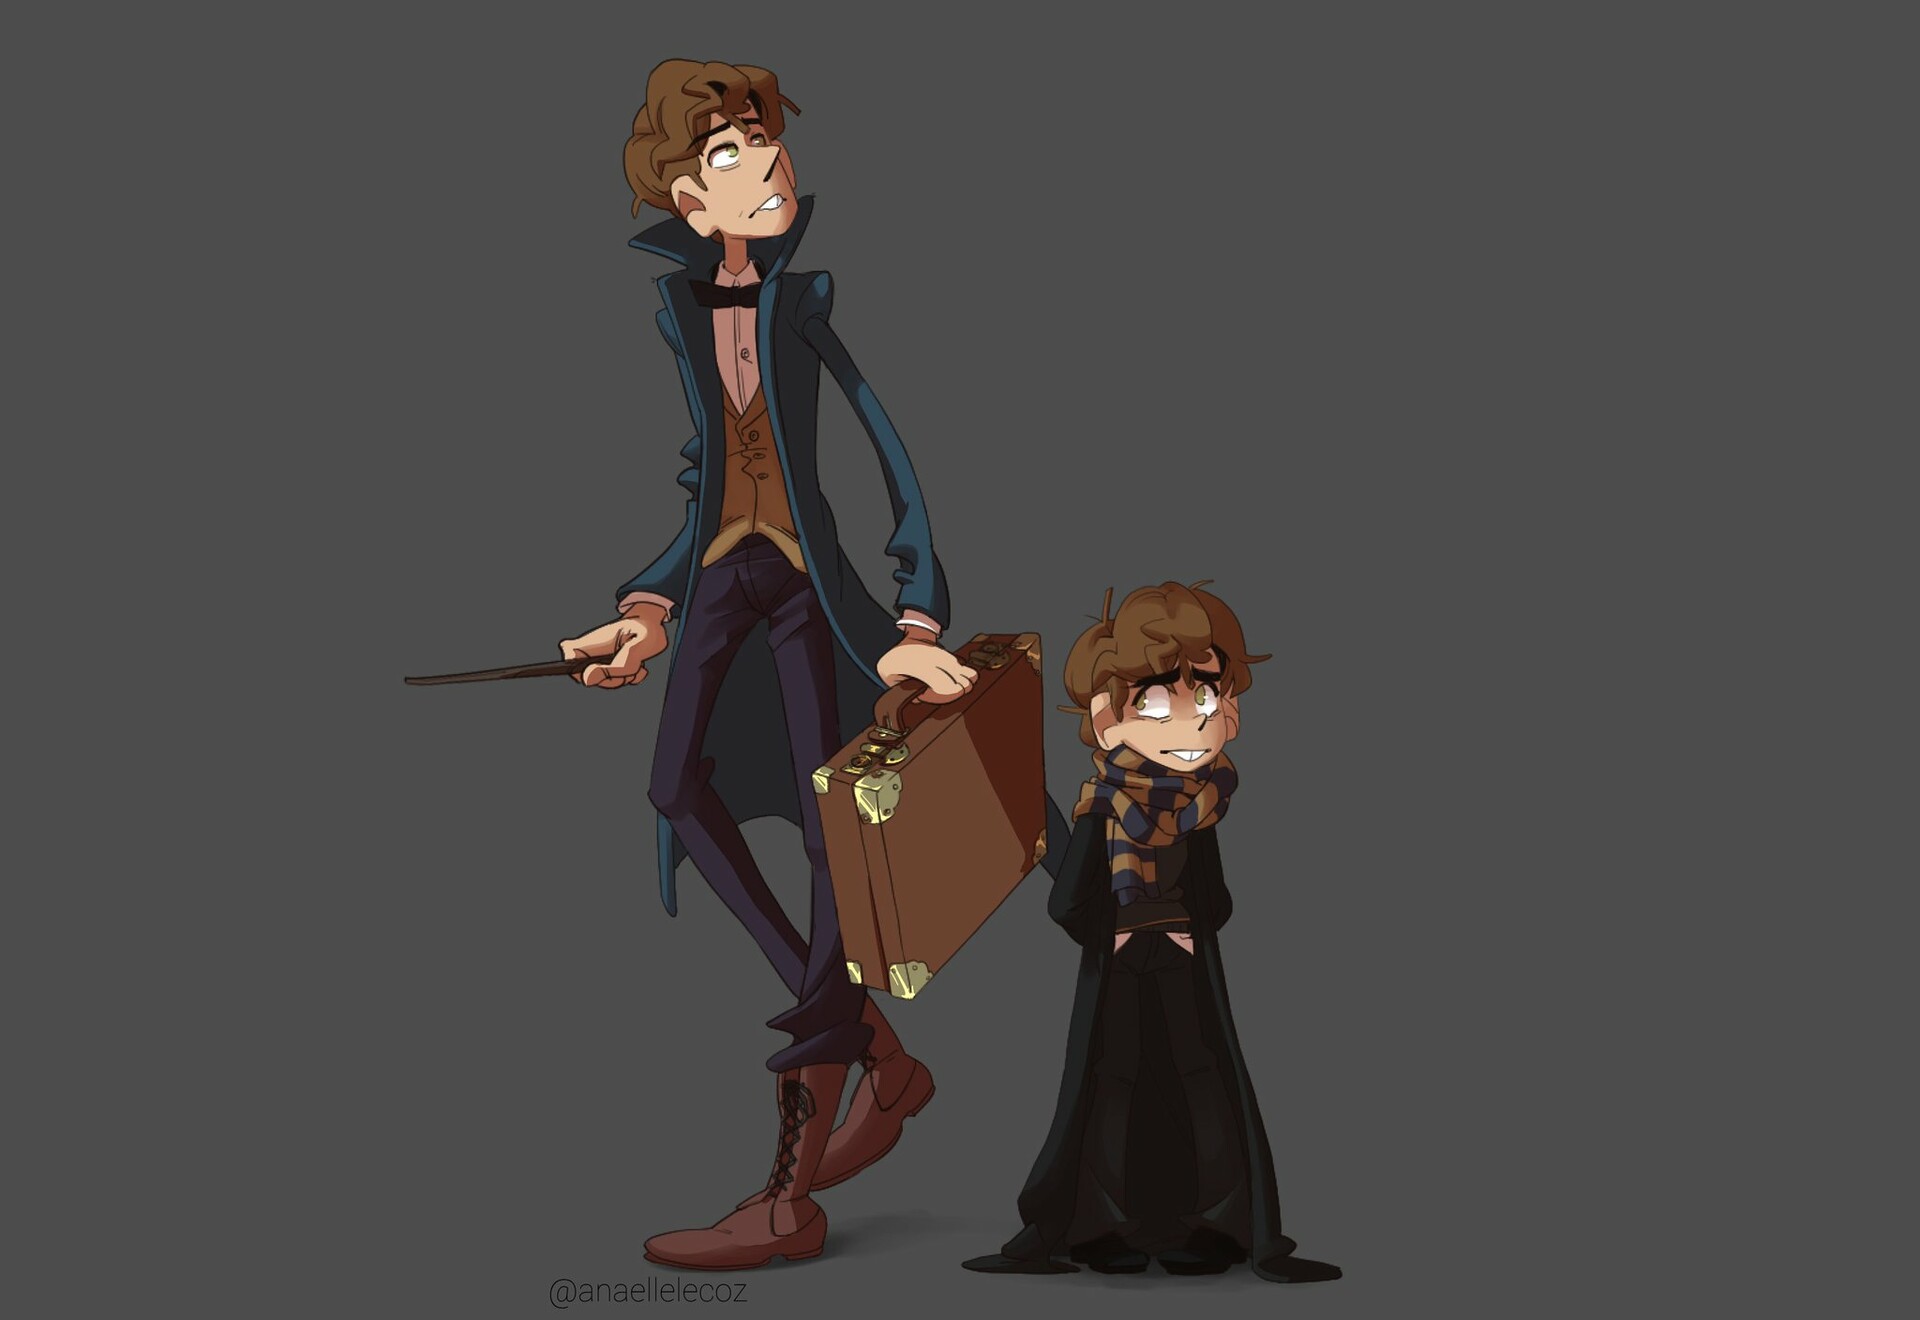 Work on designing Newt Scamander, the protagonist of Fantastic Beasts and W...